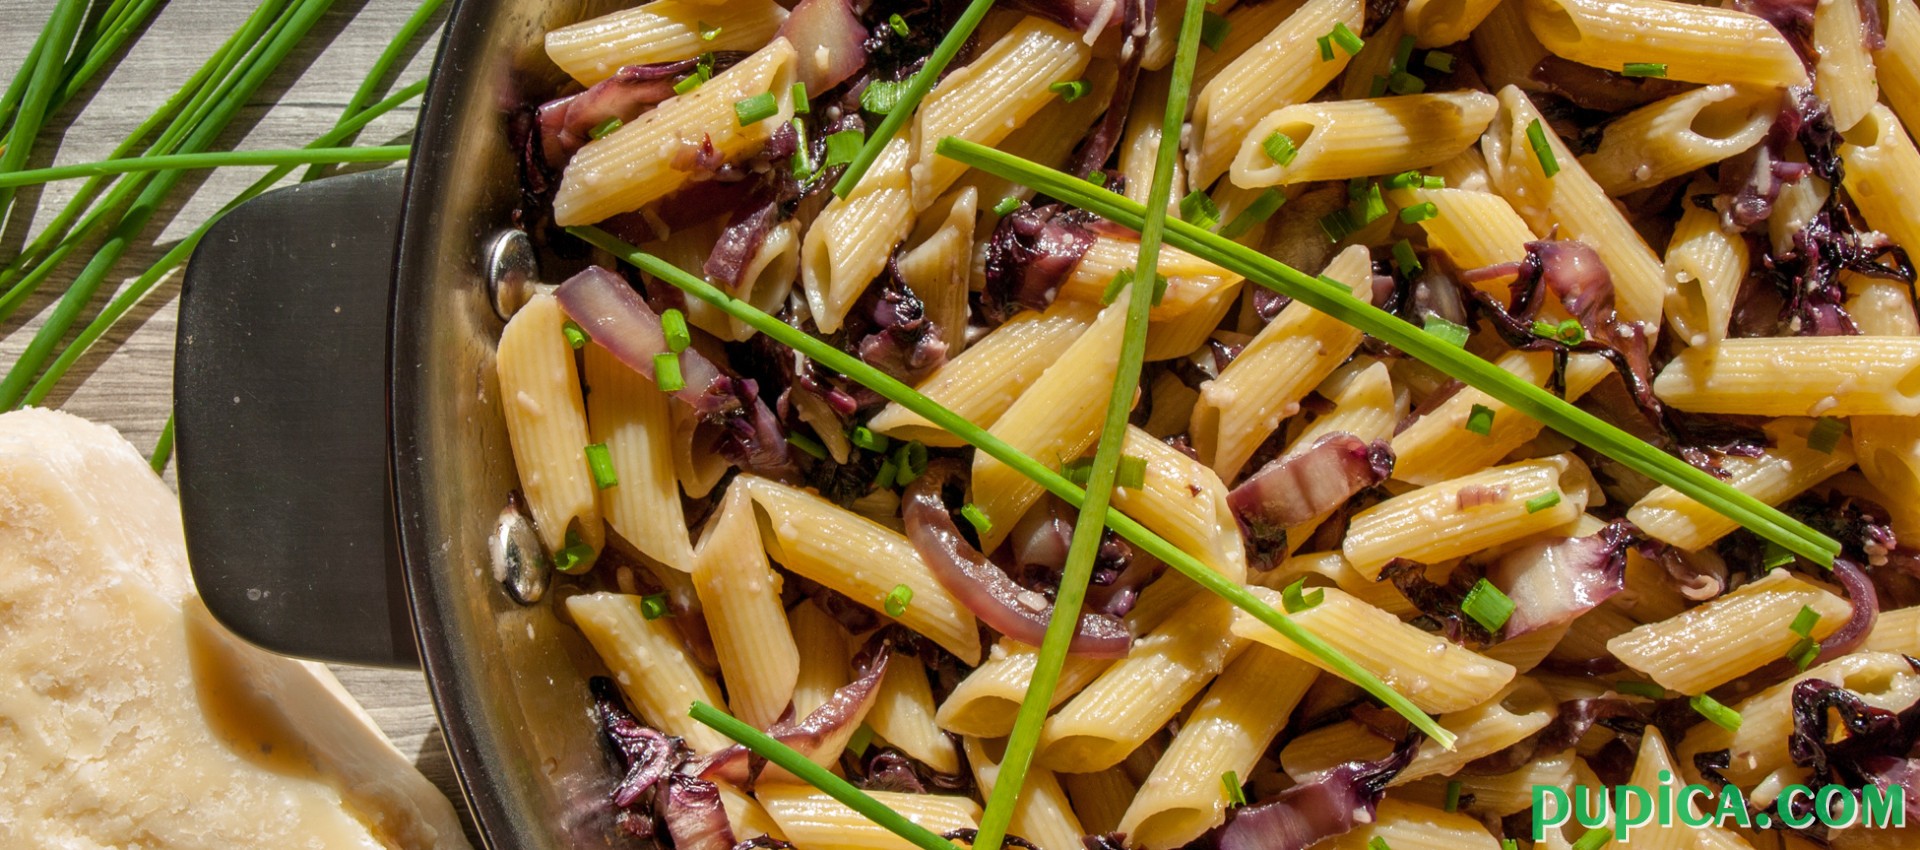 Pasta with radicchio and chives